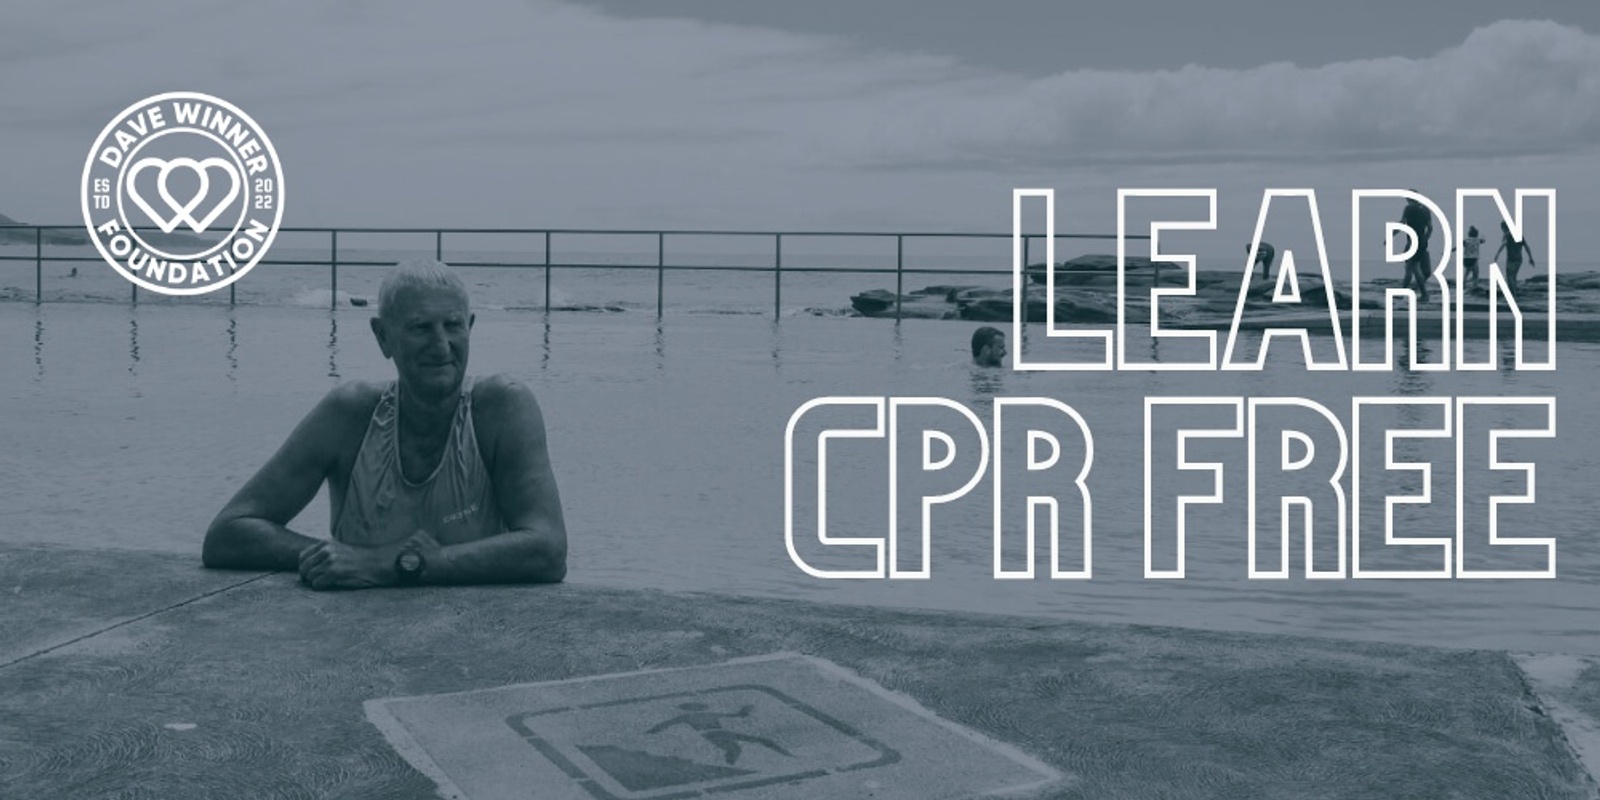 Banner image for Winner Foundation: Free CPR Training #19